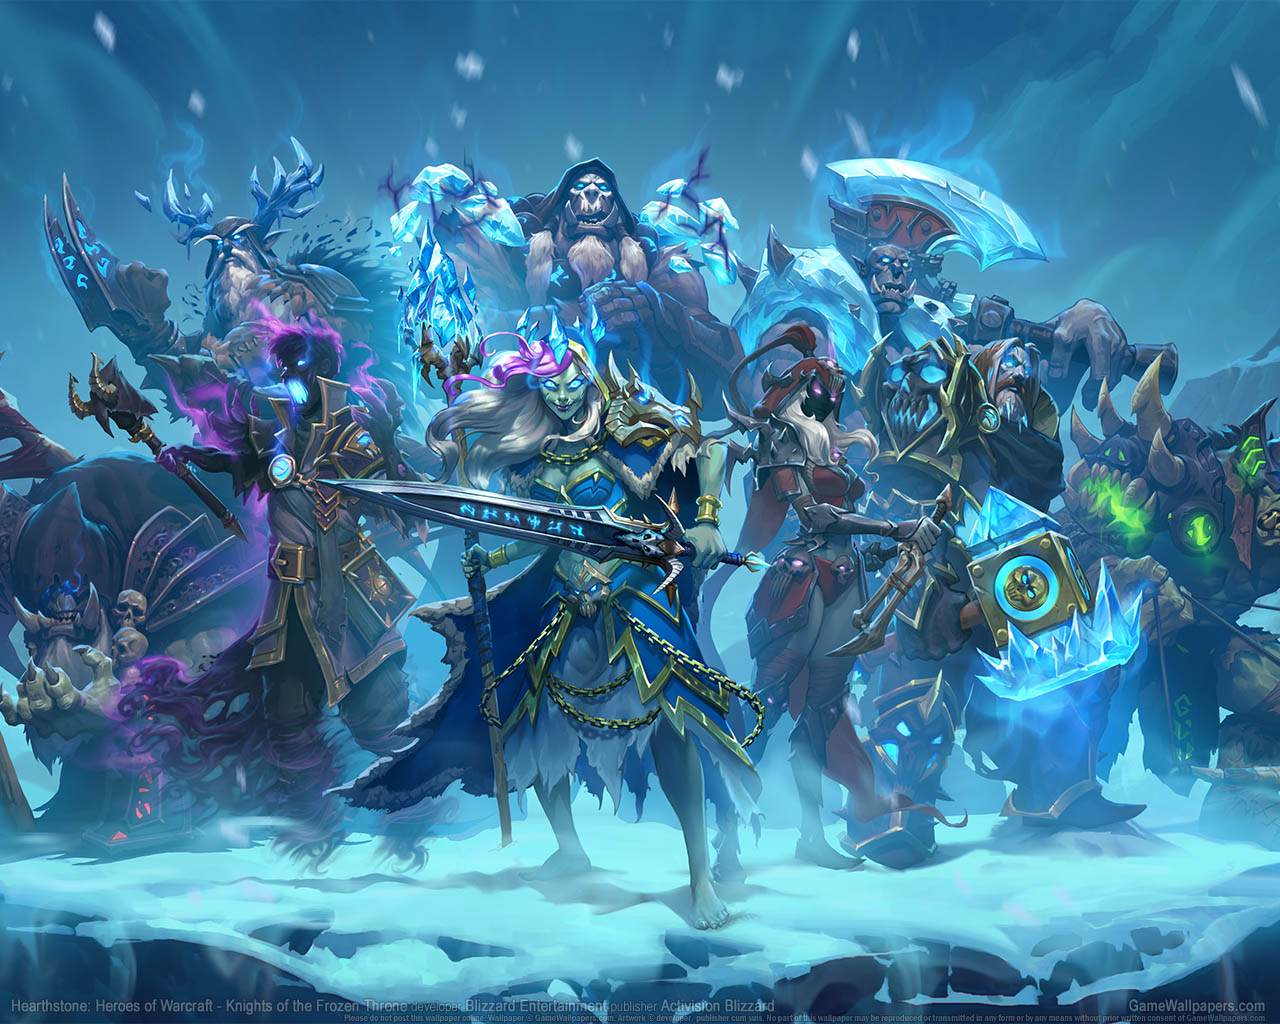 Hearthstone: Heroes of Warcraft - Knights of the Frozen Throneνmmer=02 fond d'cran  1280x1024